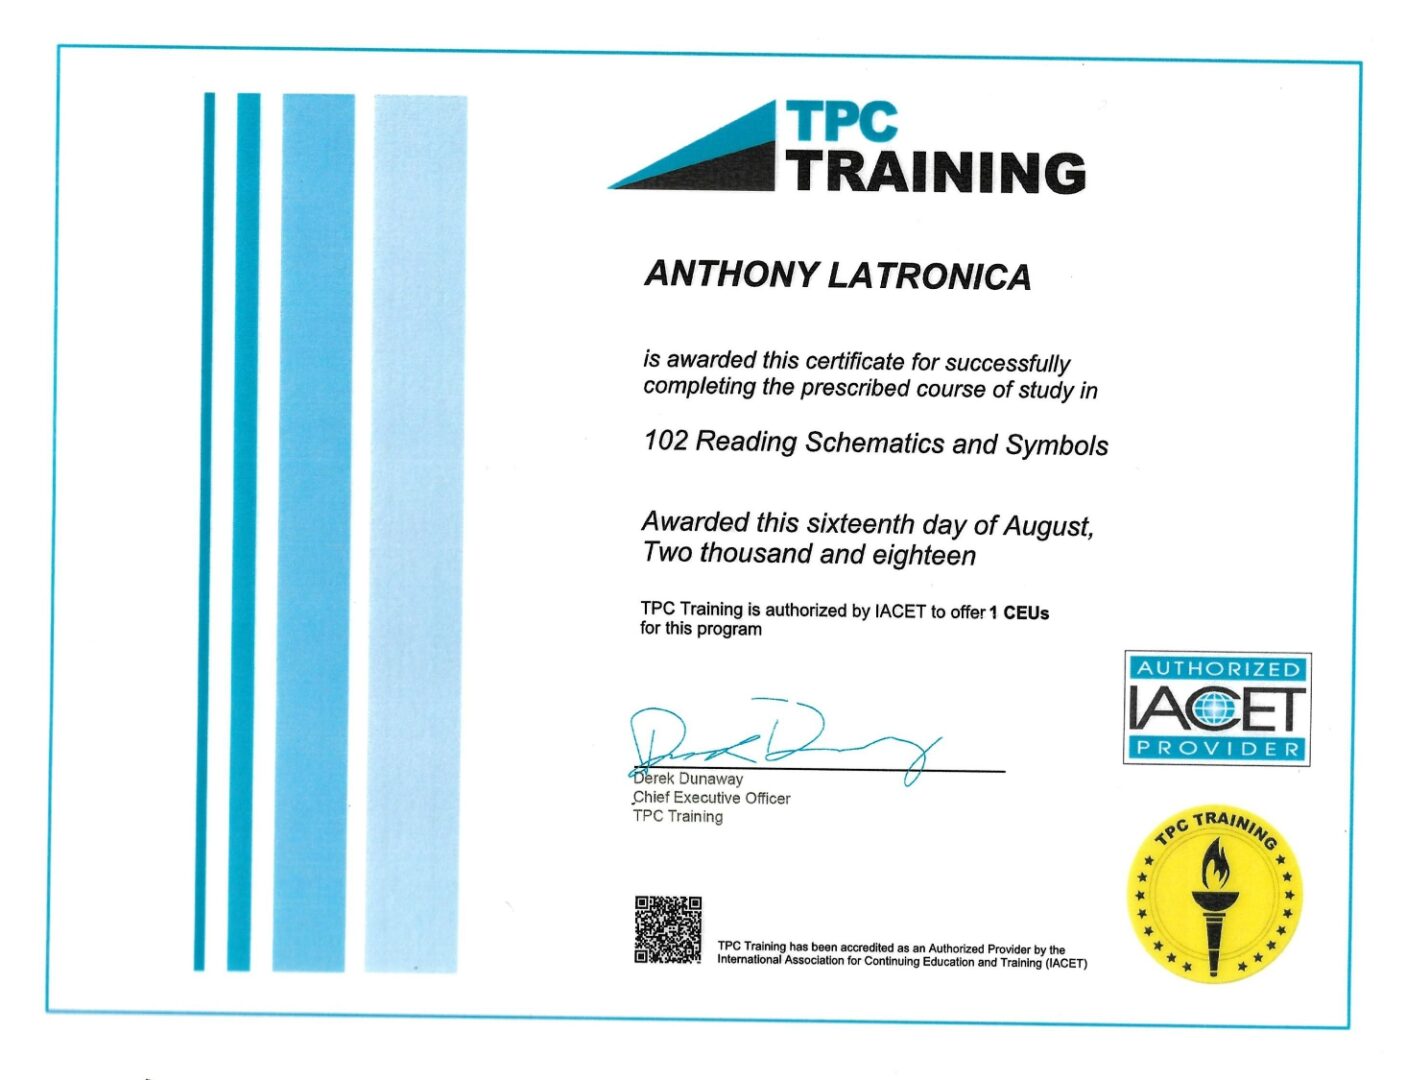 A certificate of completion for an apprenticeship